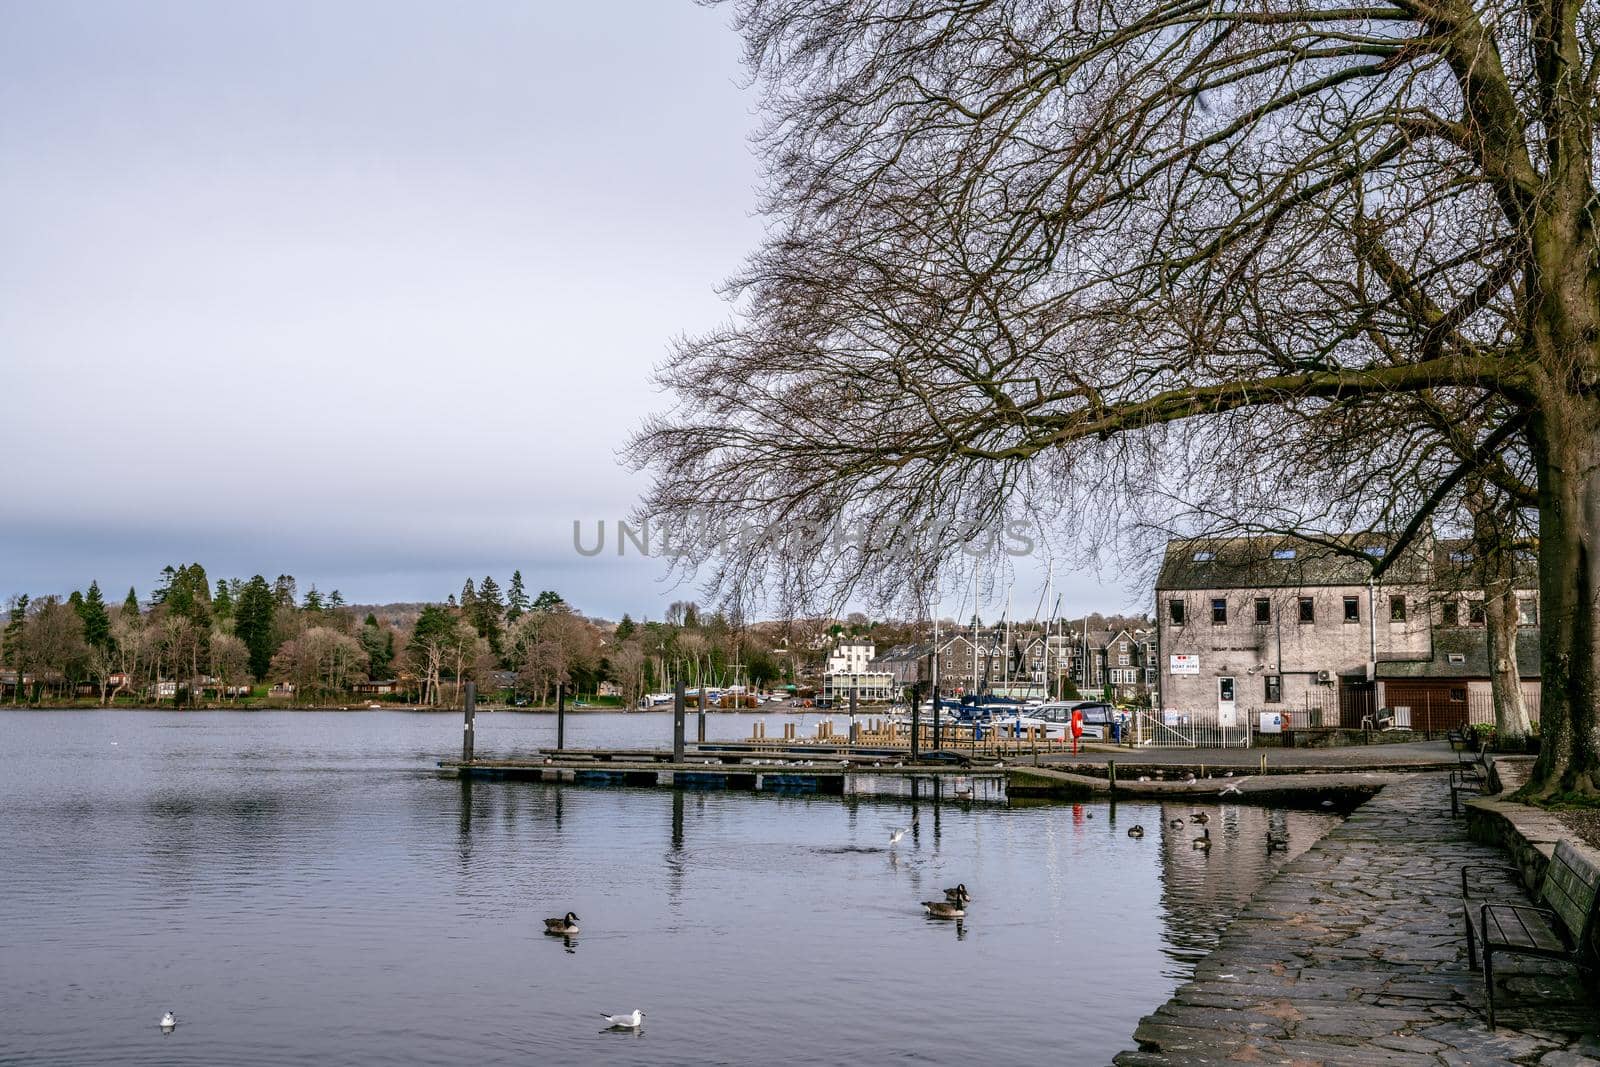 Bowness on Windermere, Cumbria, UK - February 01, 2021: Tourist pleasure boats on Bowness Bay Lake Windermere during covid lockdown by paddythegolfer